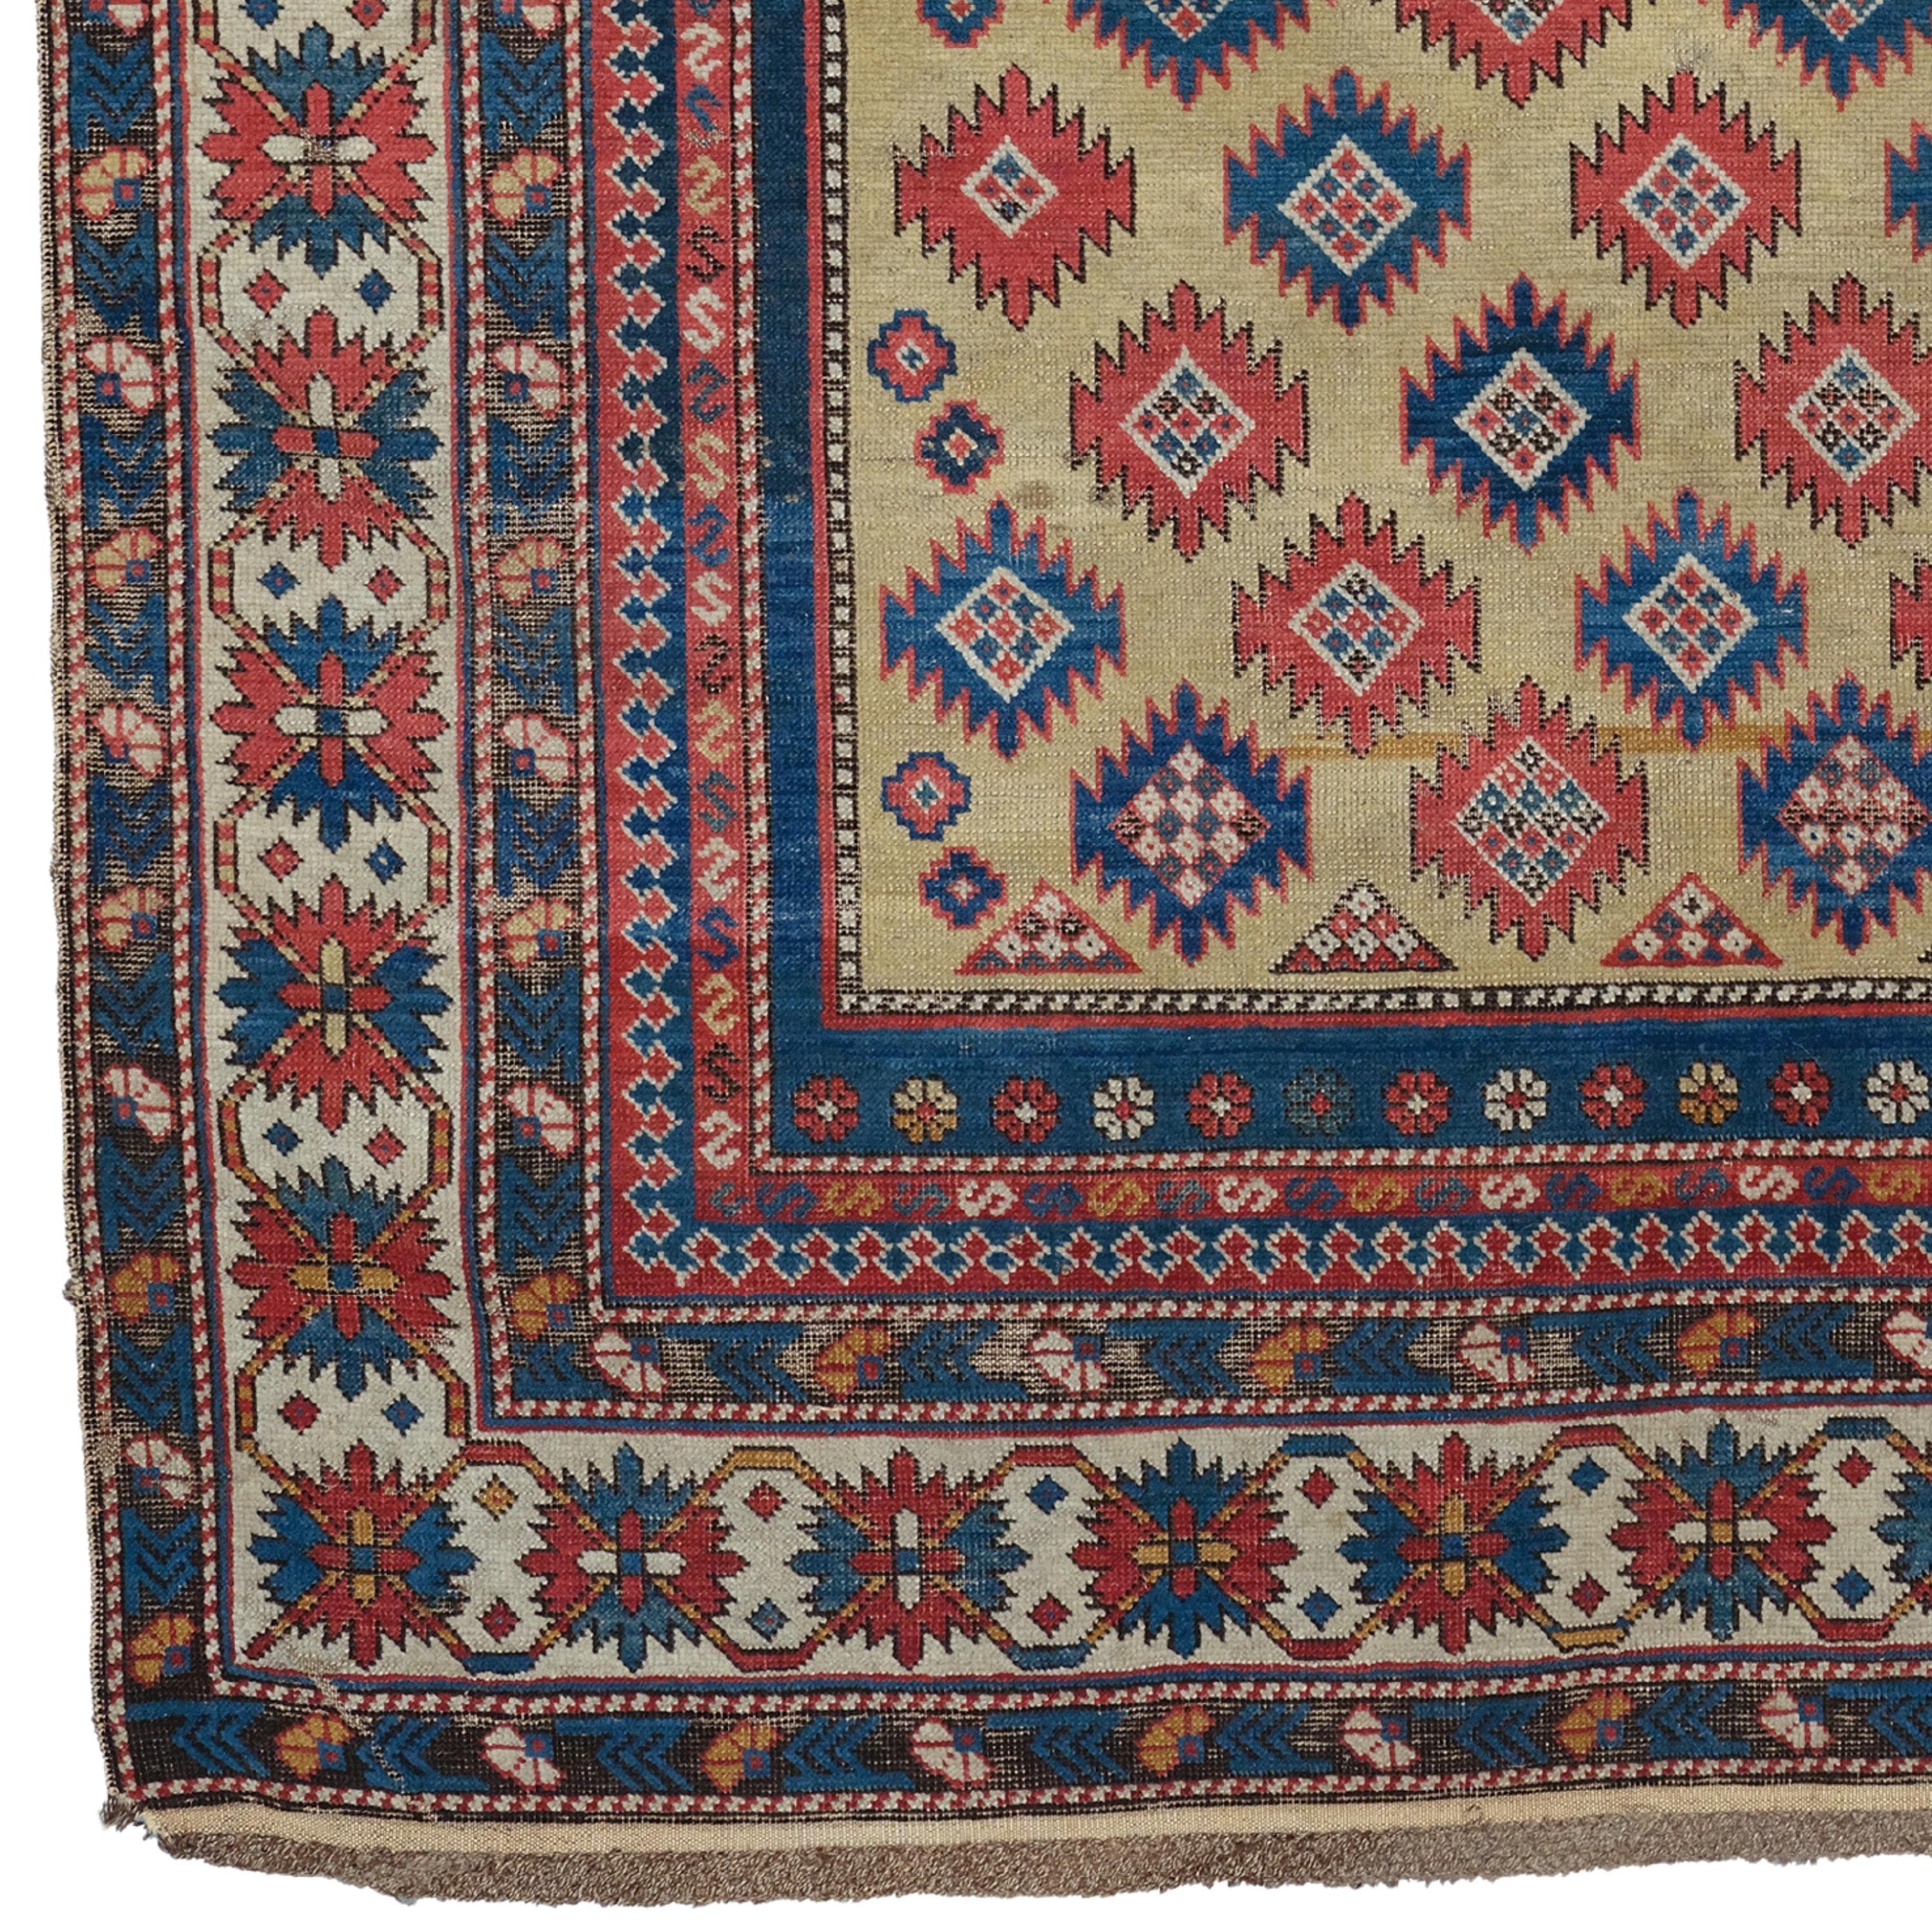 Caucasian Prayer Shirvan Rug  Circa 1870
Size: 135 x 168 cm

This impressive antique Caucasian Shirvan rug from the 1870s reflects the exquisite artistry and mastery of a historic period. This carefully hand-woven carpet attracts attention with its